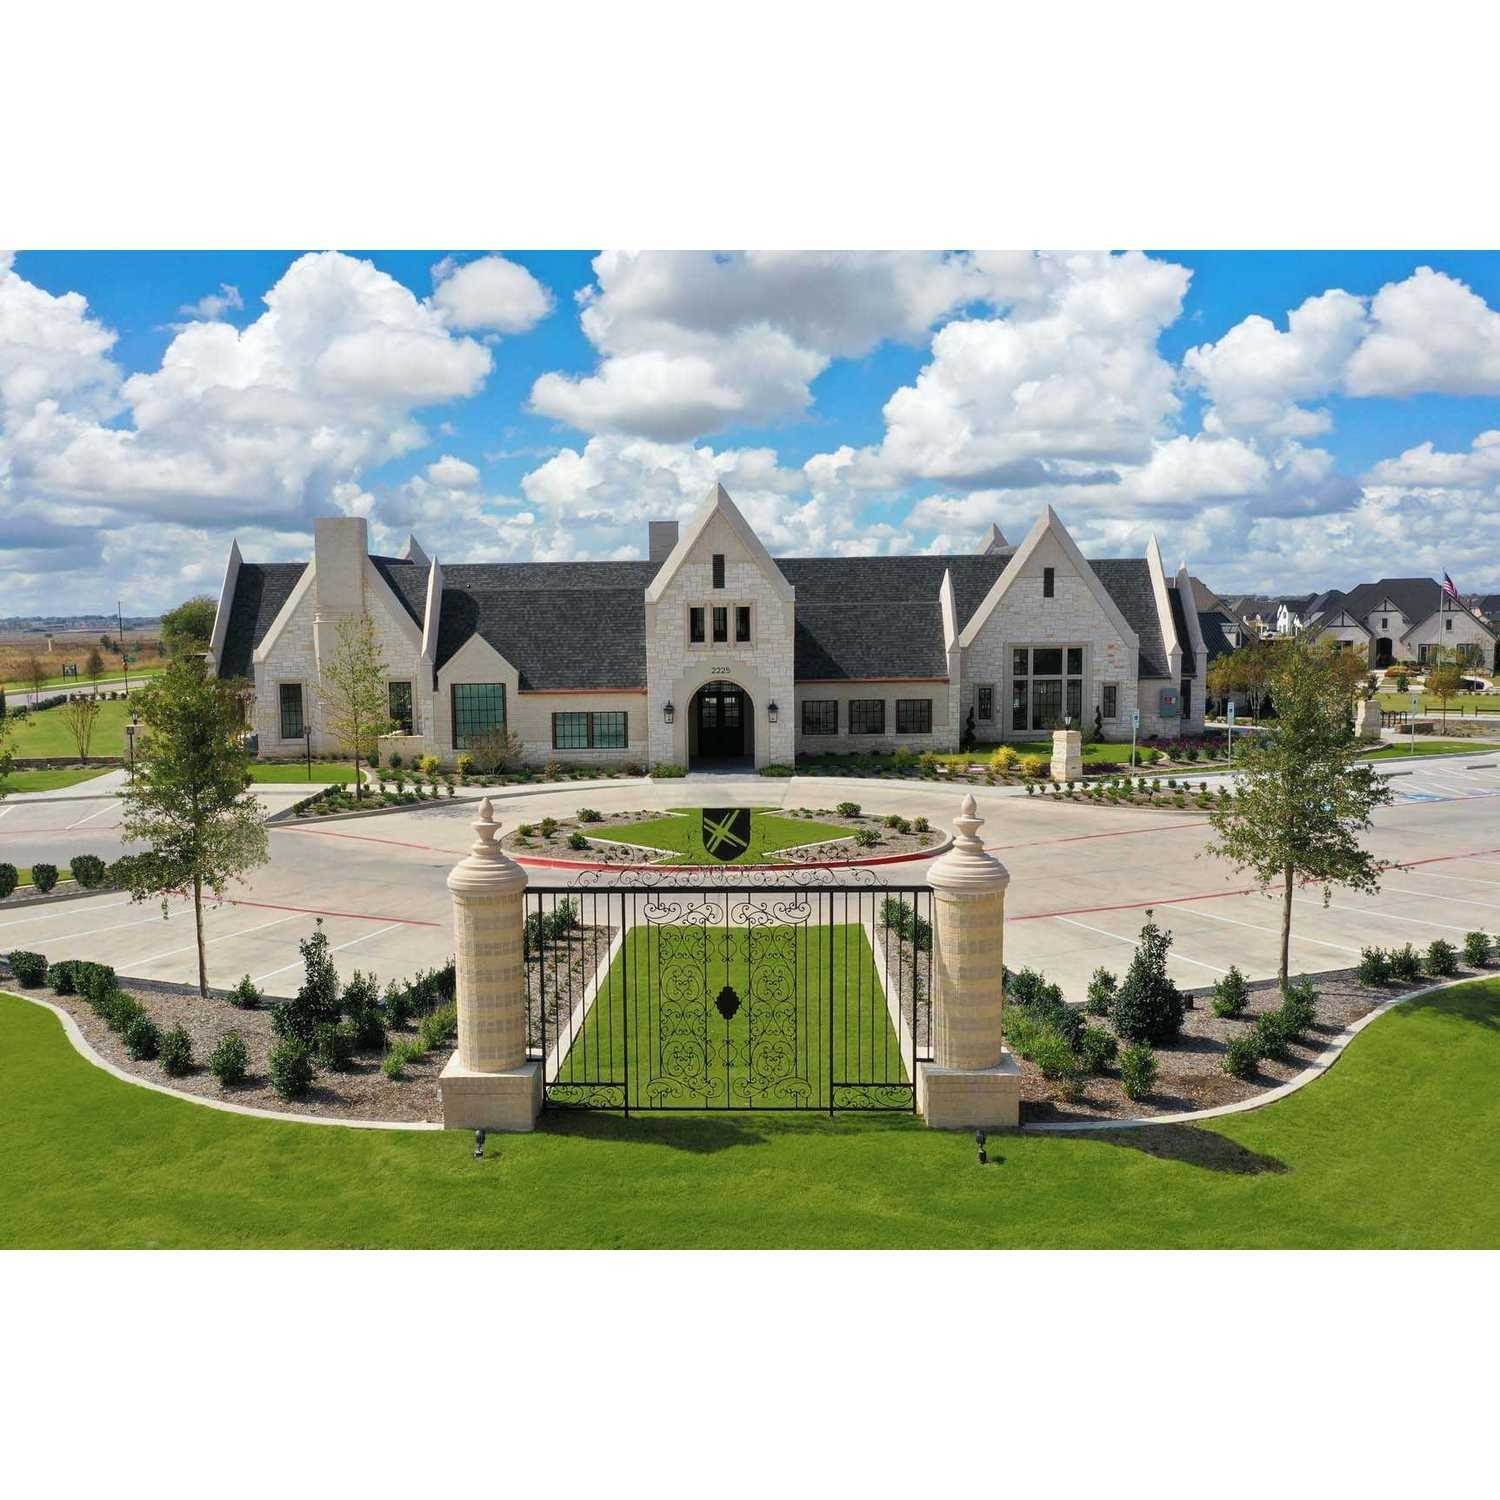 Cambridge Crossing 40ft. lots building at 2237 Pinner Court, Frisco, TX 75035